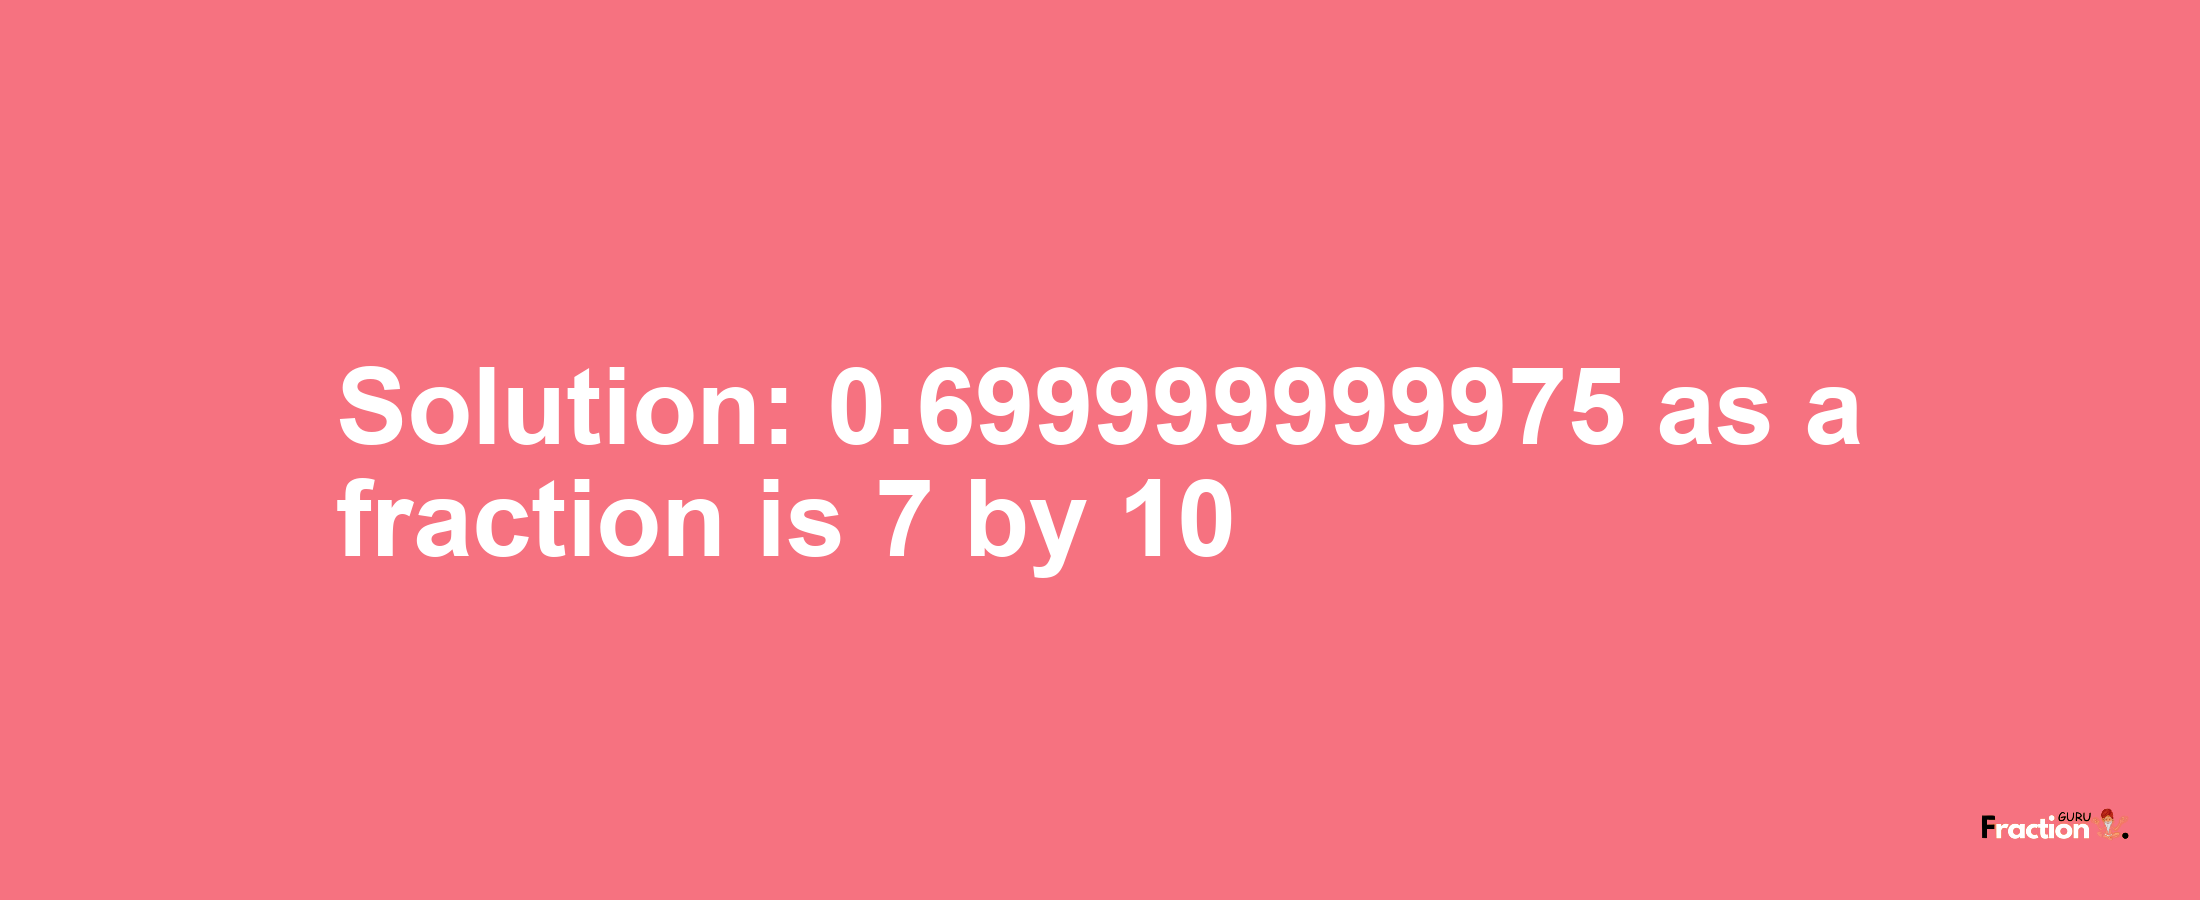 Solution:0.699999999975 as a fraction is 7/10